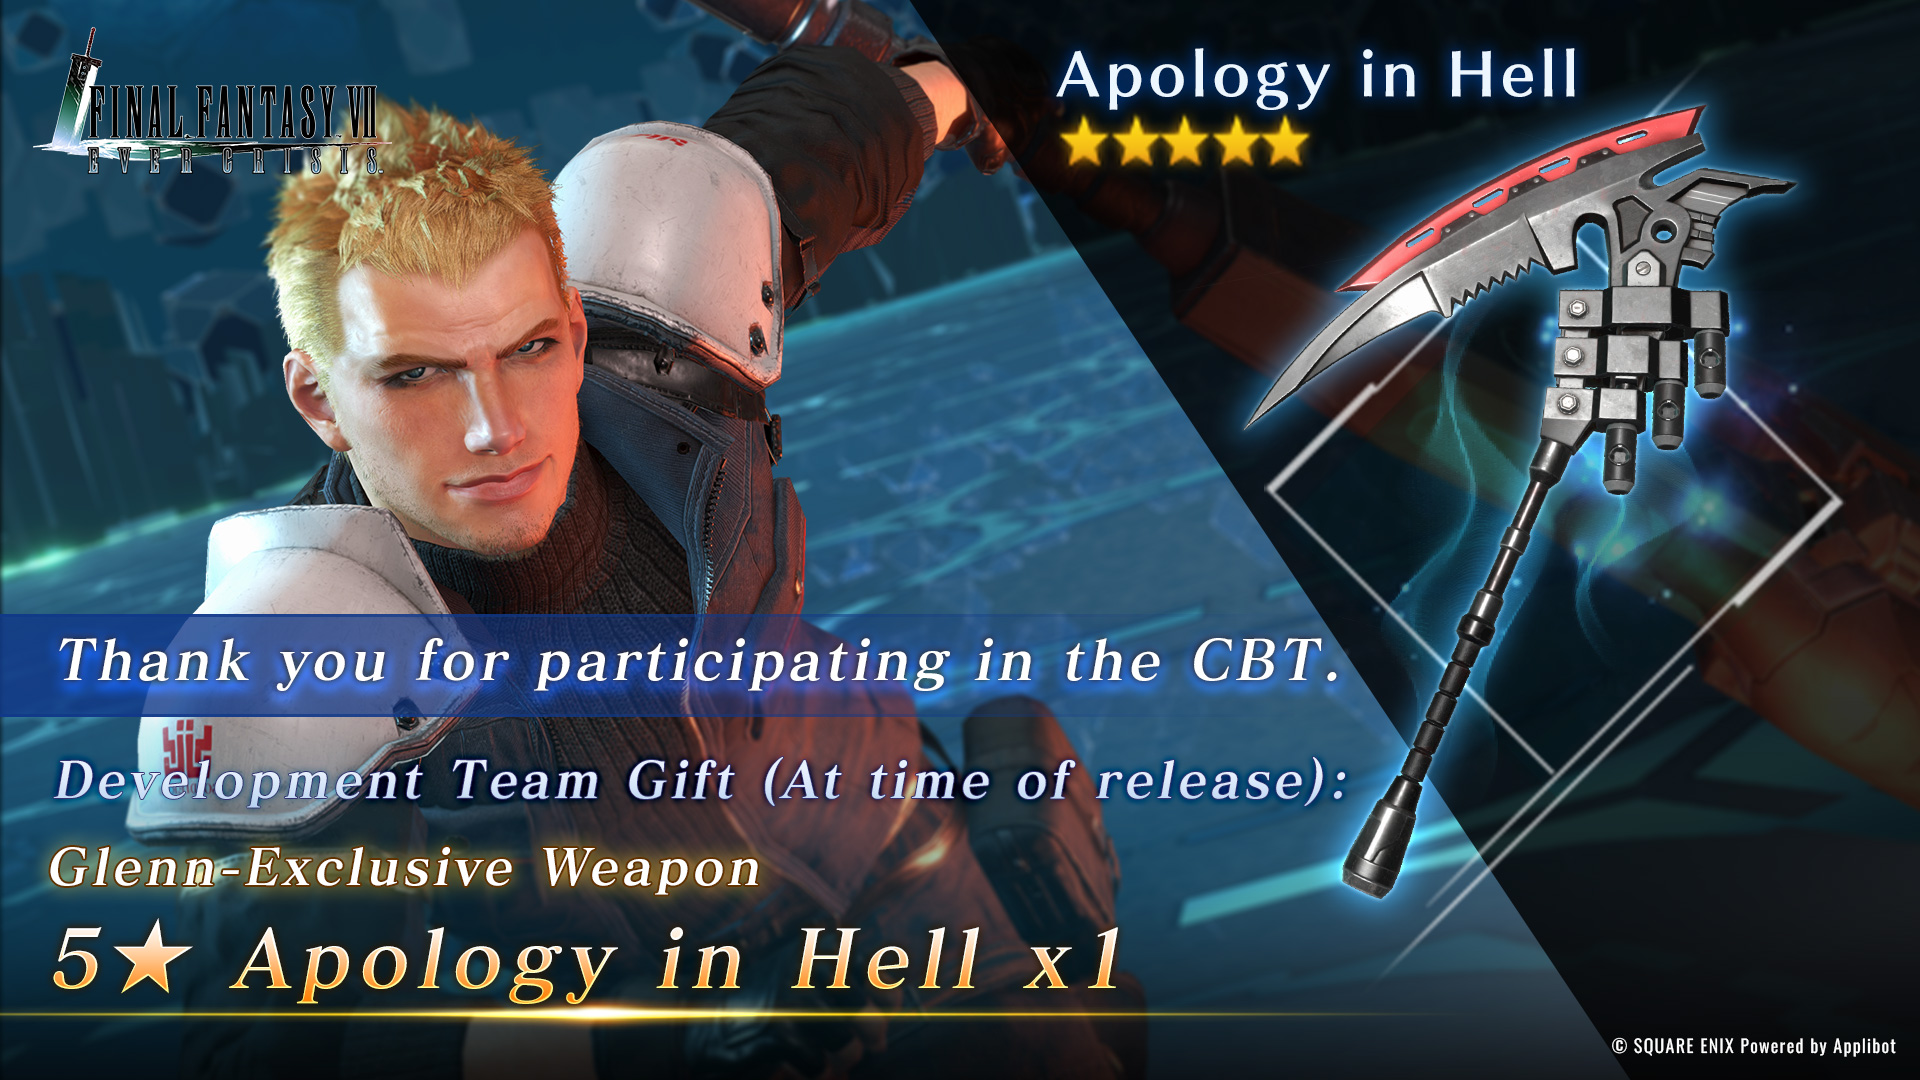 Thank you for participating in the CBT. Development Team Gift(At time of release): Glenn-Exclusive Weapon 5? Apology in Hell x1